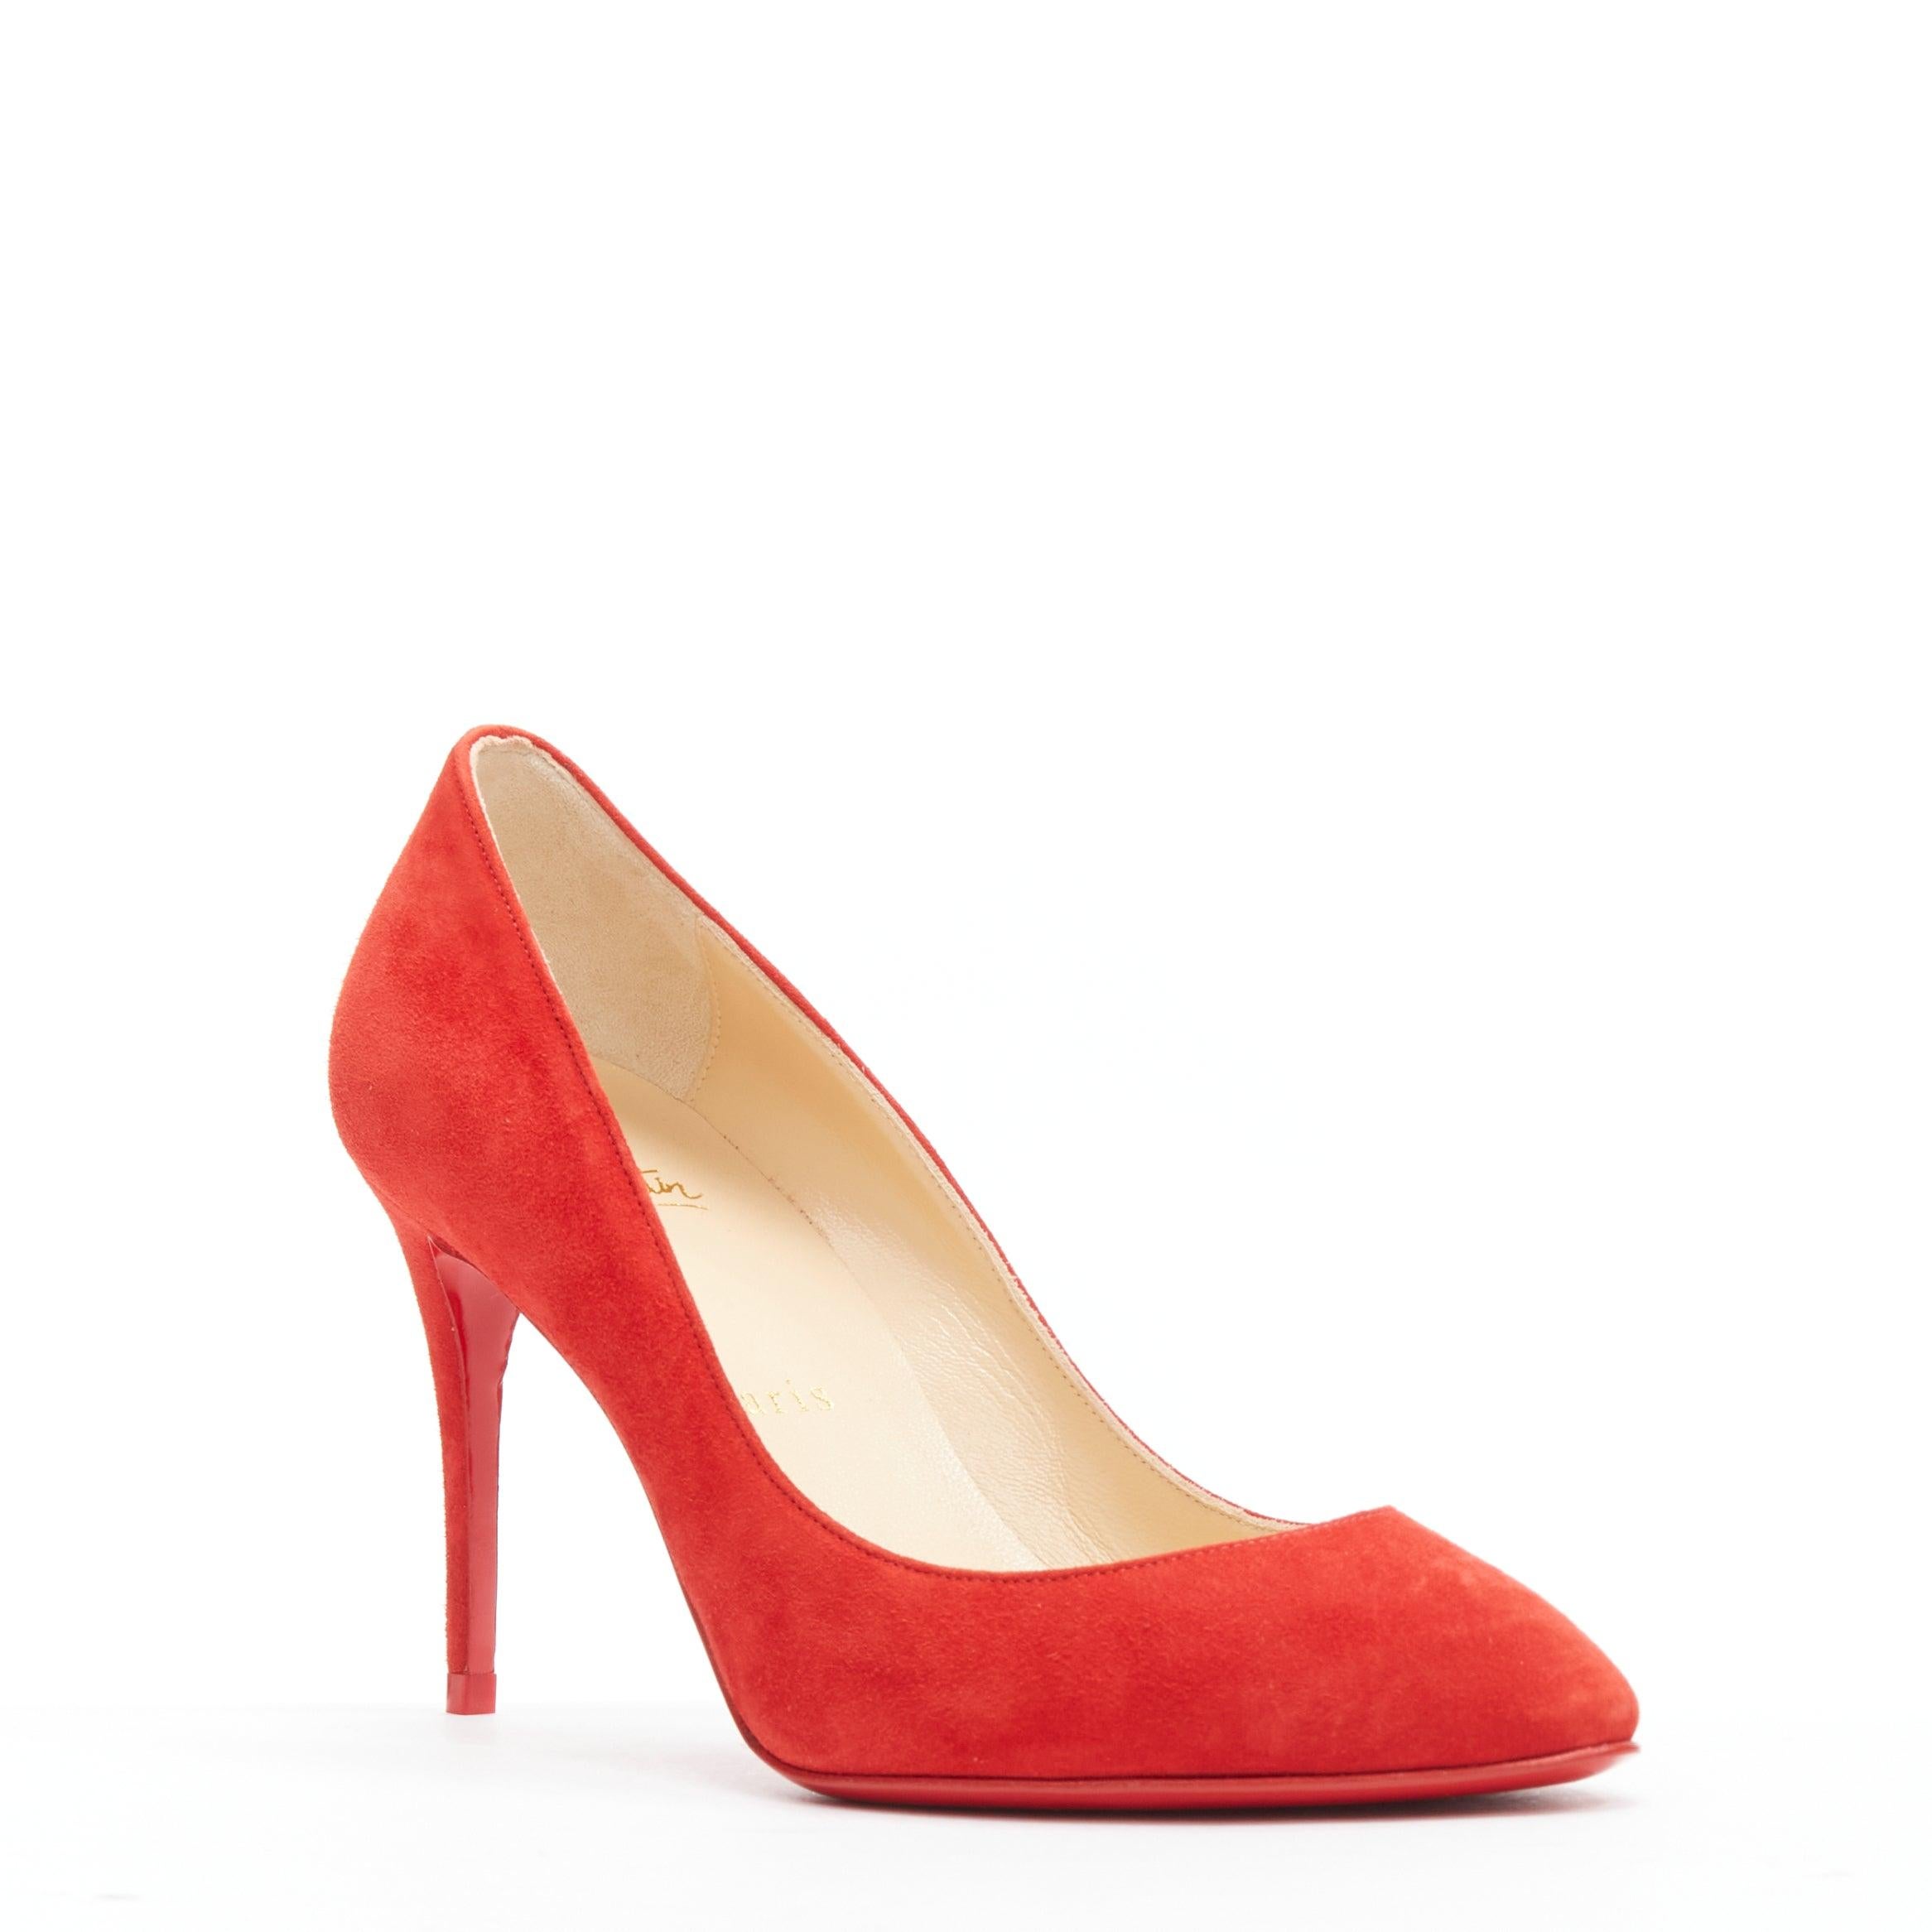 new CHRISTIAN LOUBOUTIN Eloise 85 Loubi red suede almond toe classic pump EU36
Reference: TGAS/A04421
Brand: Christian Louboutin
Model: Eloise 85
Material: Suede
Color: Red
Pattern: Solid
Extra Details: Style code: 3180614
Made in: